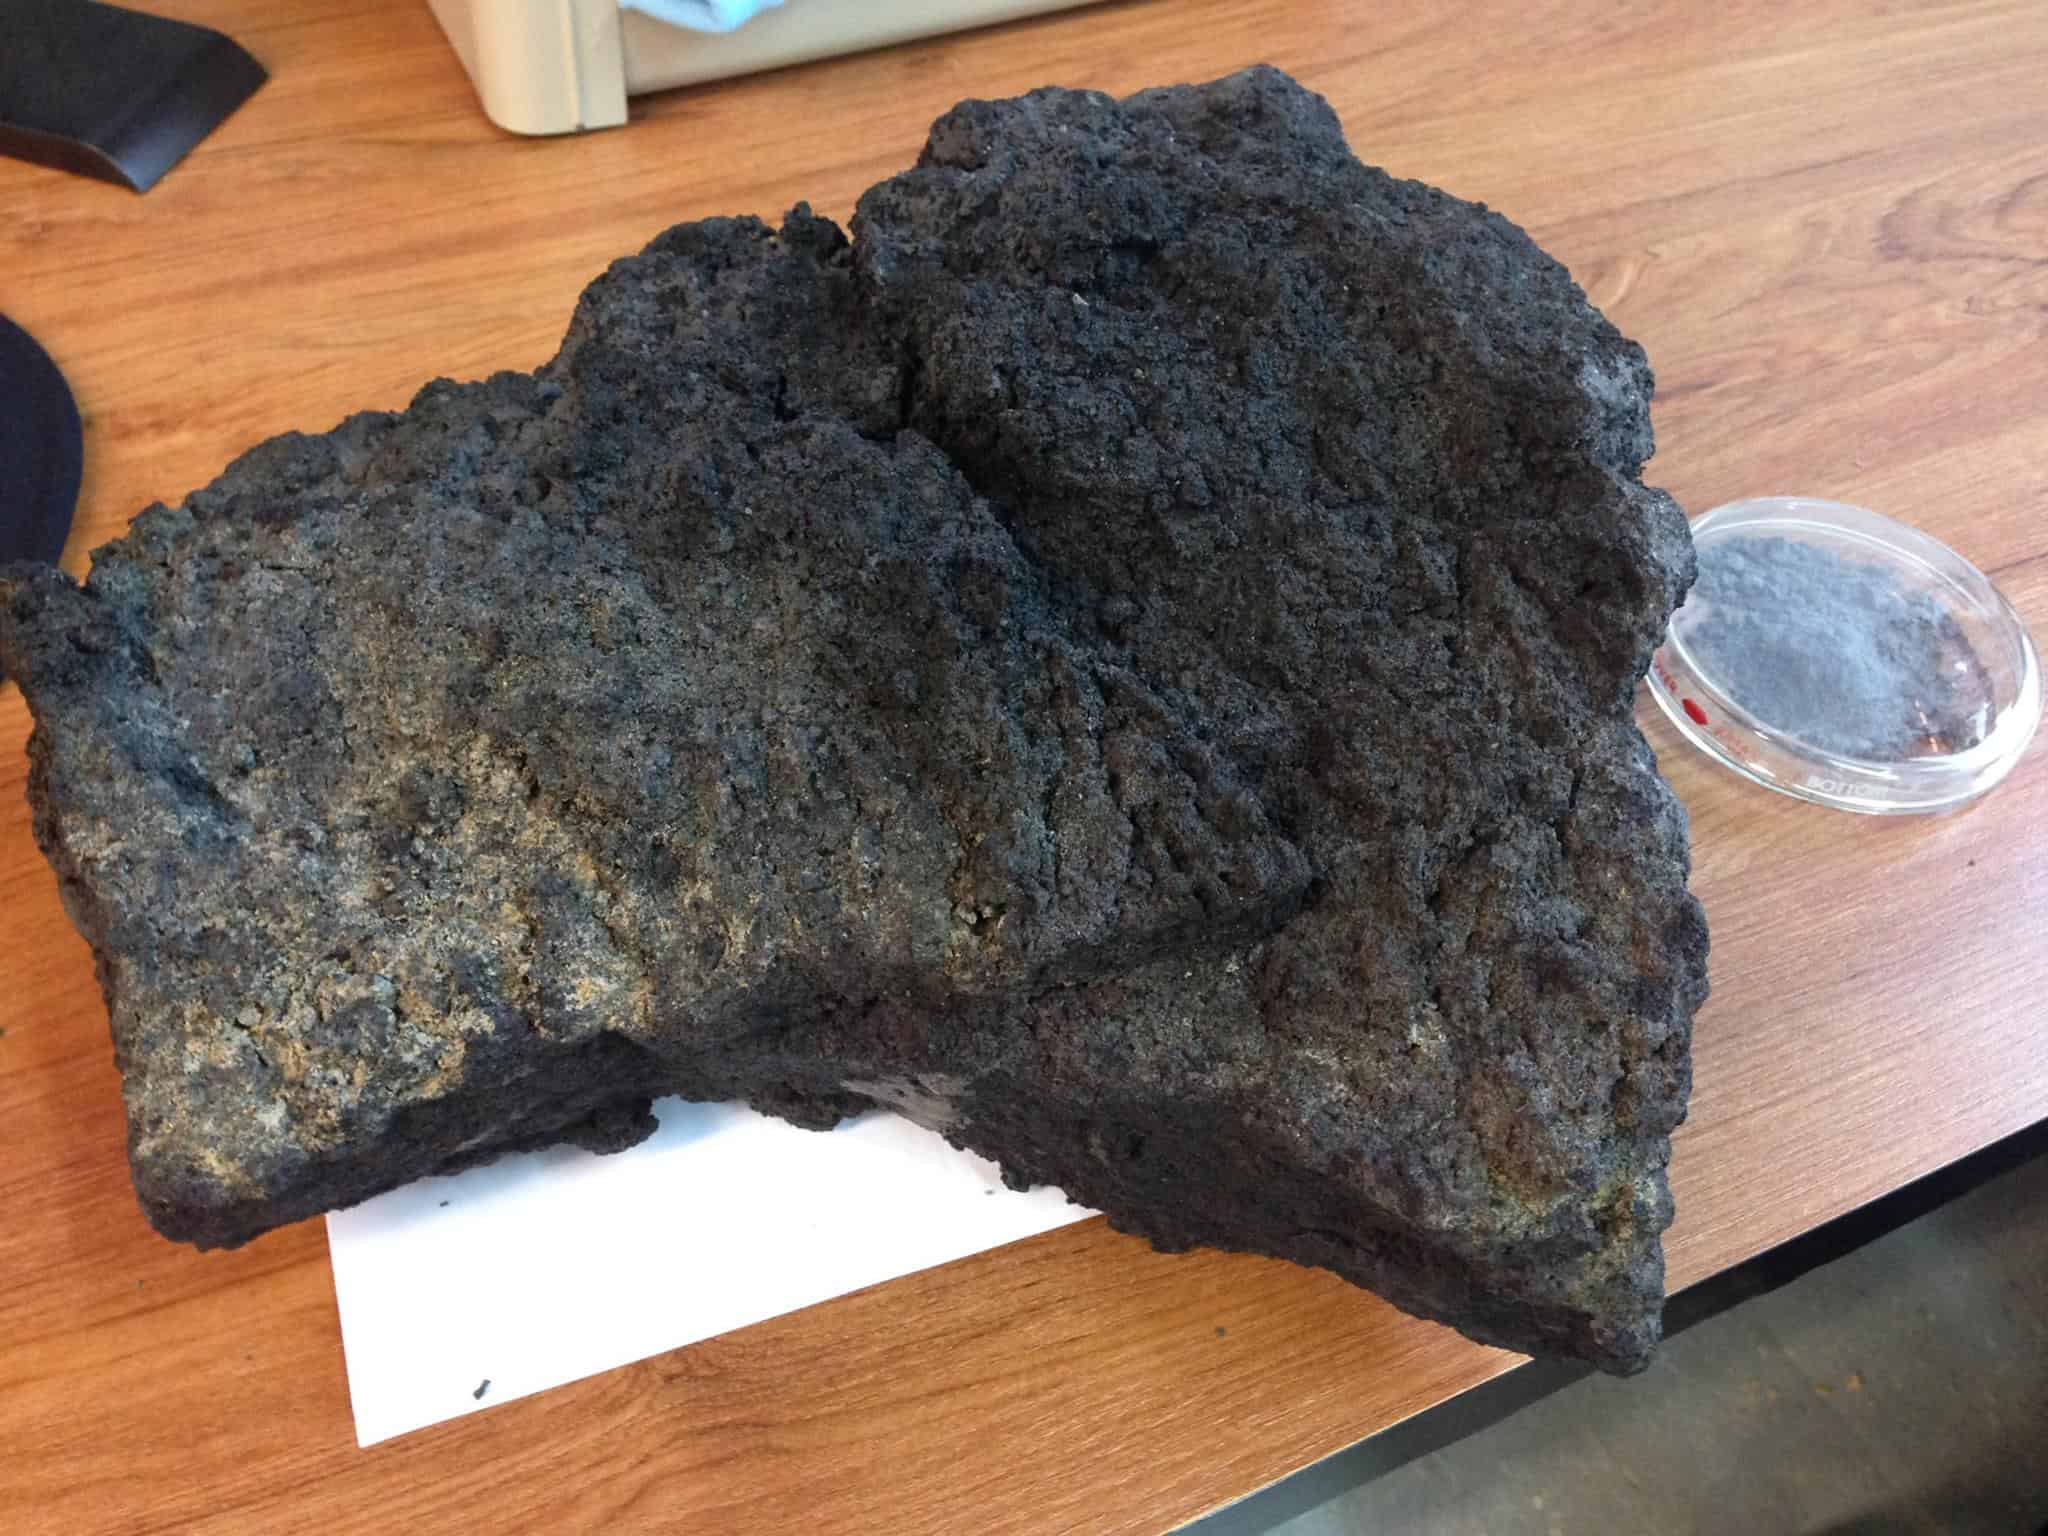 A fragment found near the crater of Turrialba Volcano, which scientists believe to be fresh, cooled lava.